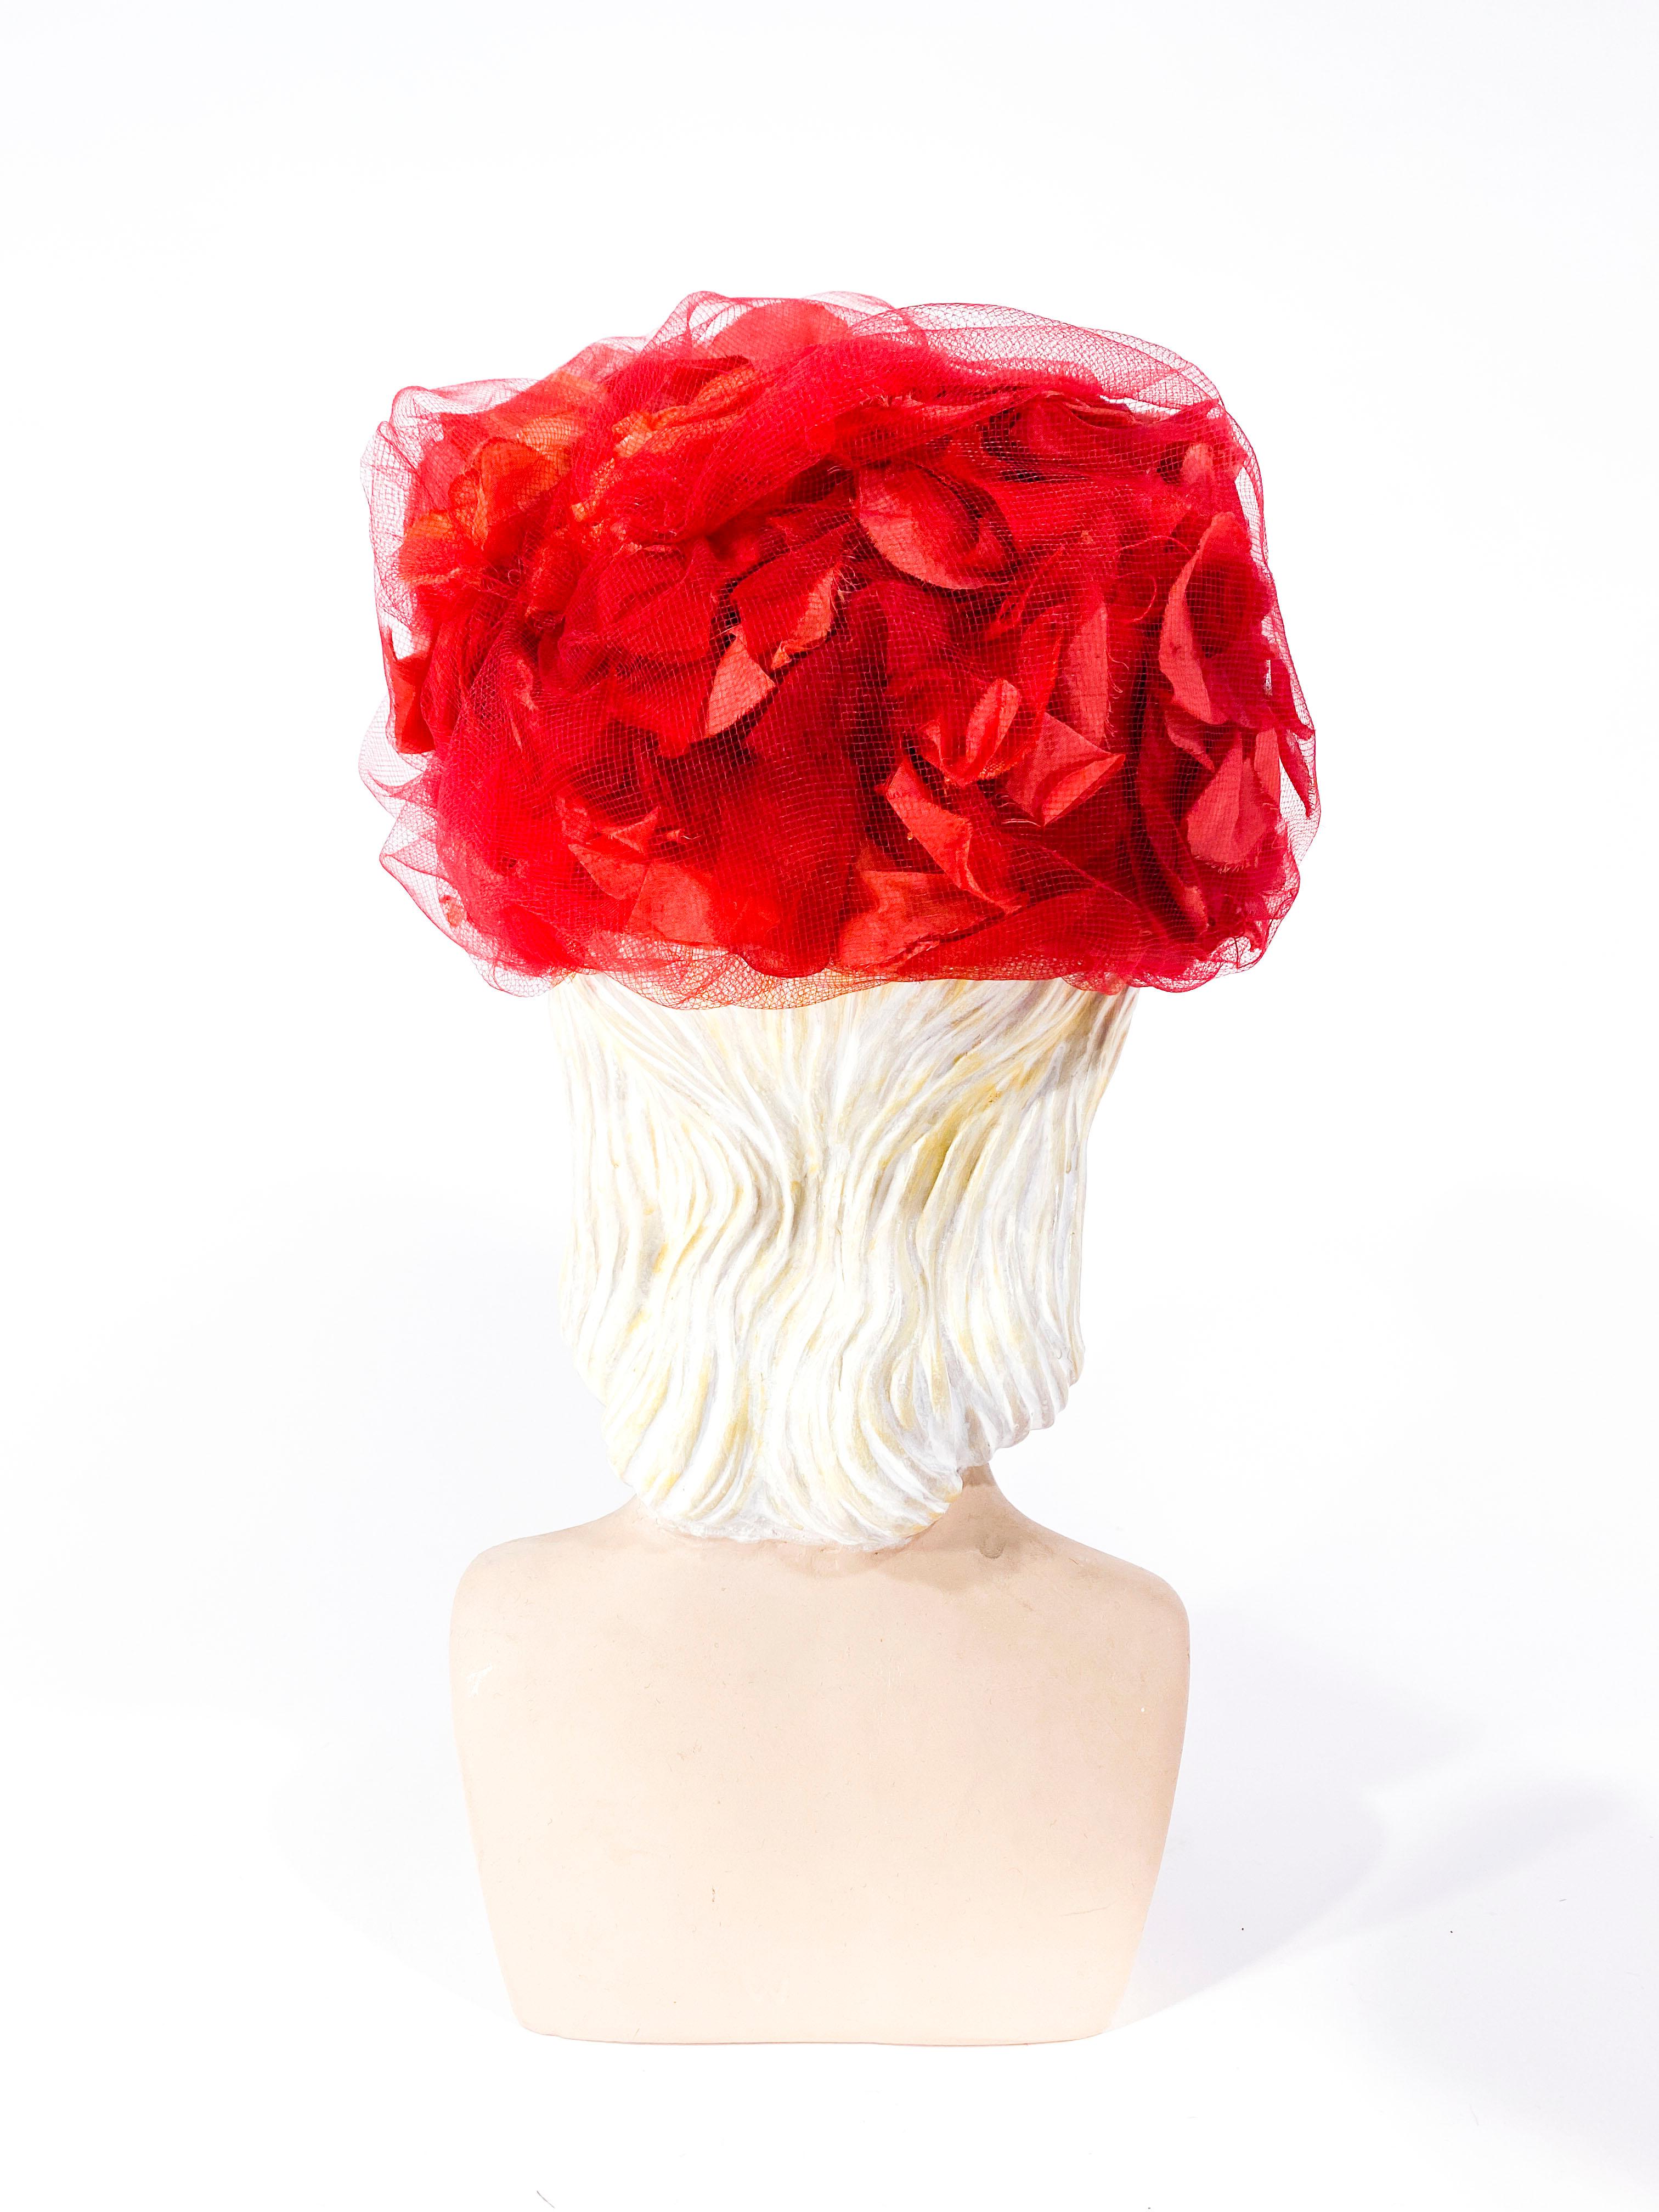 Gray 1950s/1960s I. Magnin Red Floral and Tulle Hat